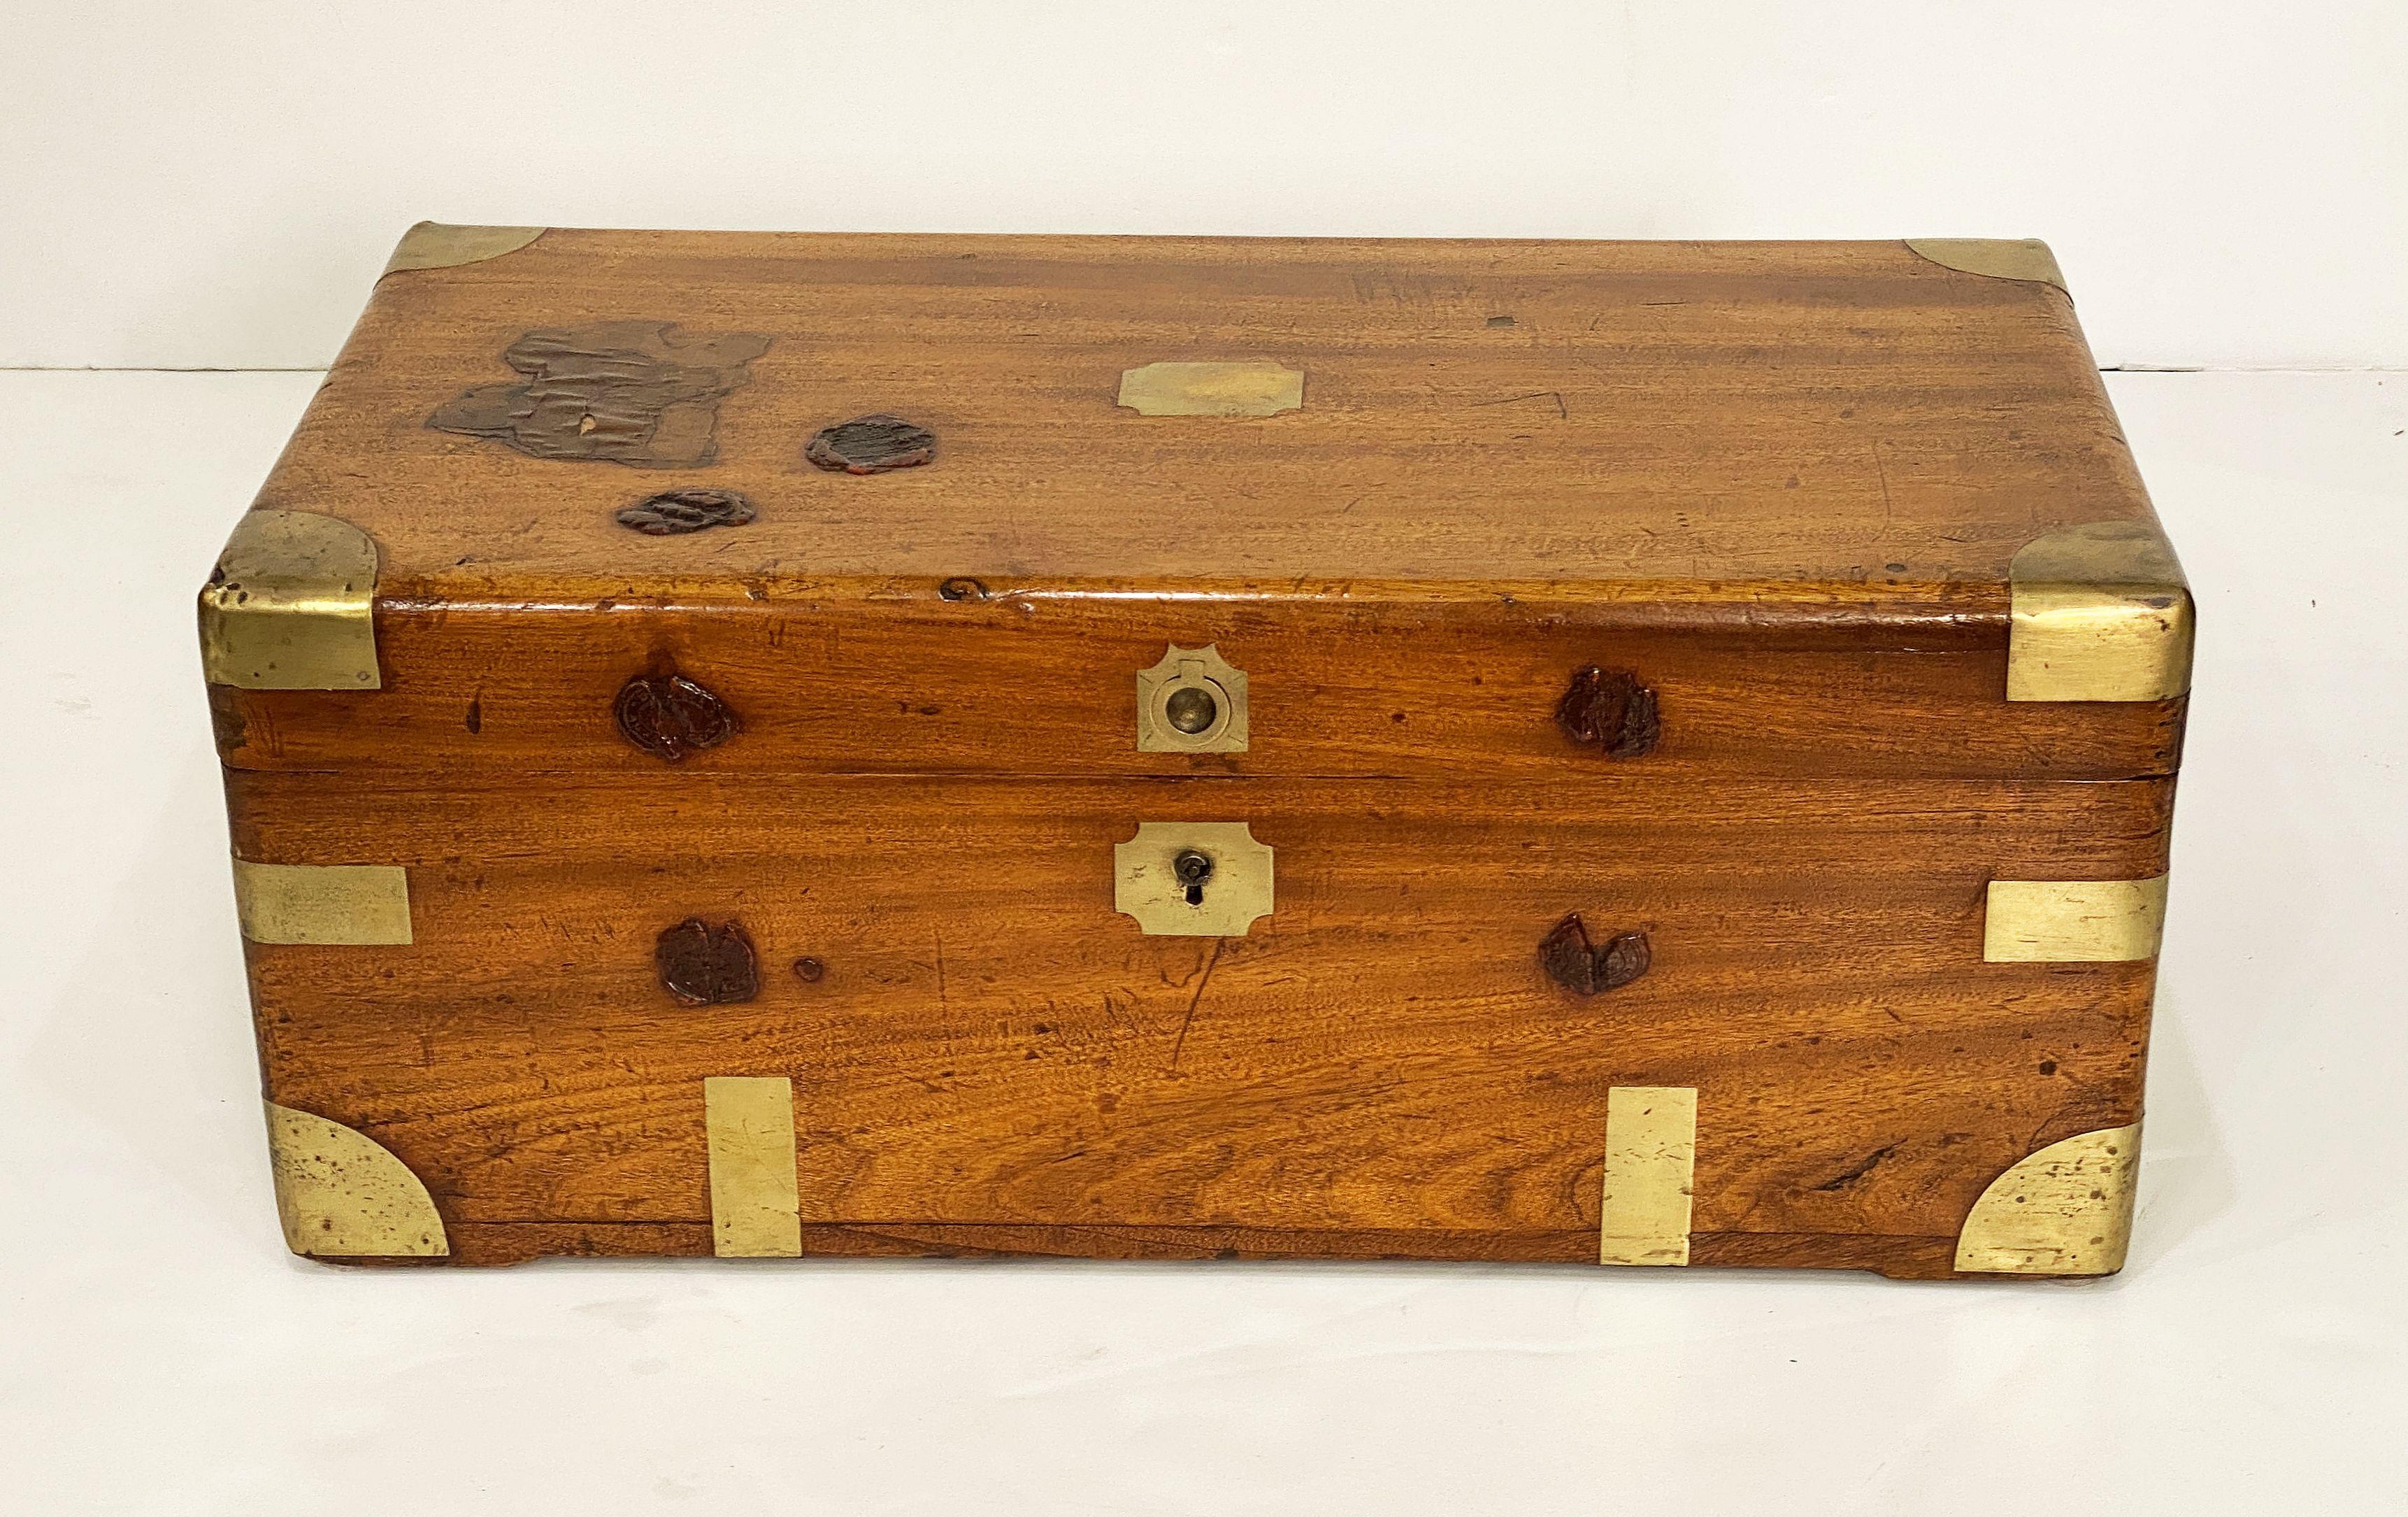 A handsome rectangular British military officer's Campaign trunk of camphorwood featuring hand-cut brass binding and hardware, with opposing handles, and wax seals or stamps from ports-of-call on the top and front.

Campaign-era trunks and coffers